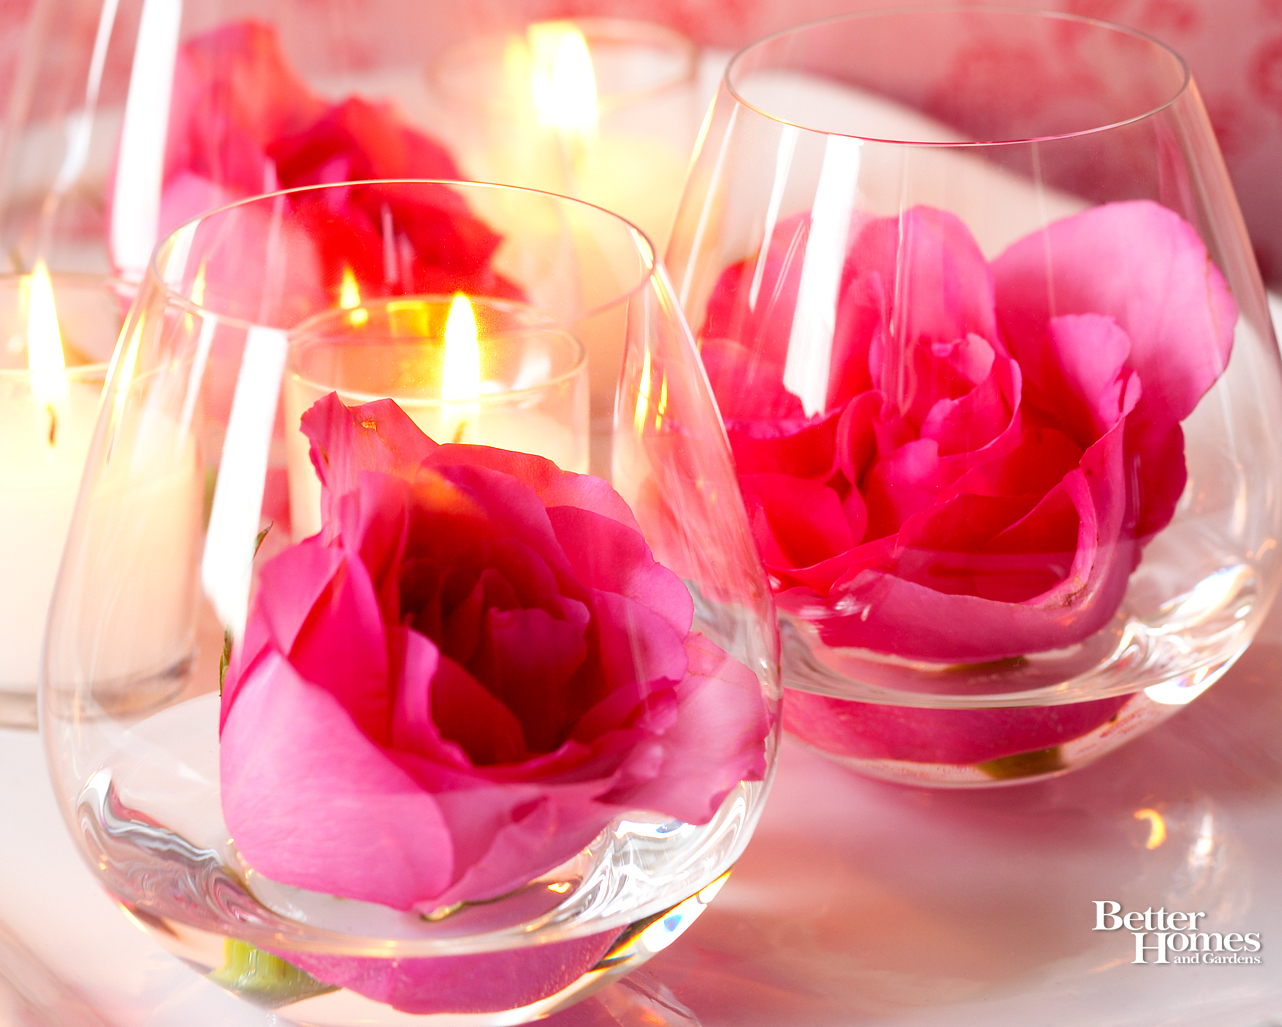 Rose in glass for Valentine's Day Desktop wallpapers 1024x600